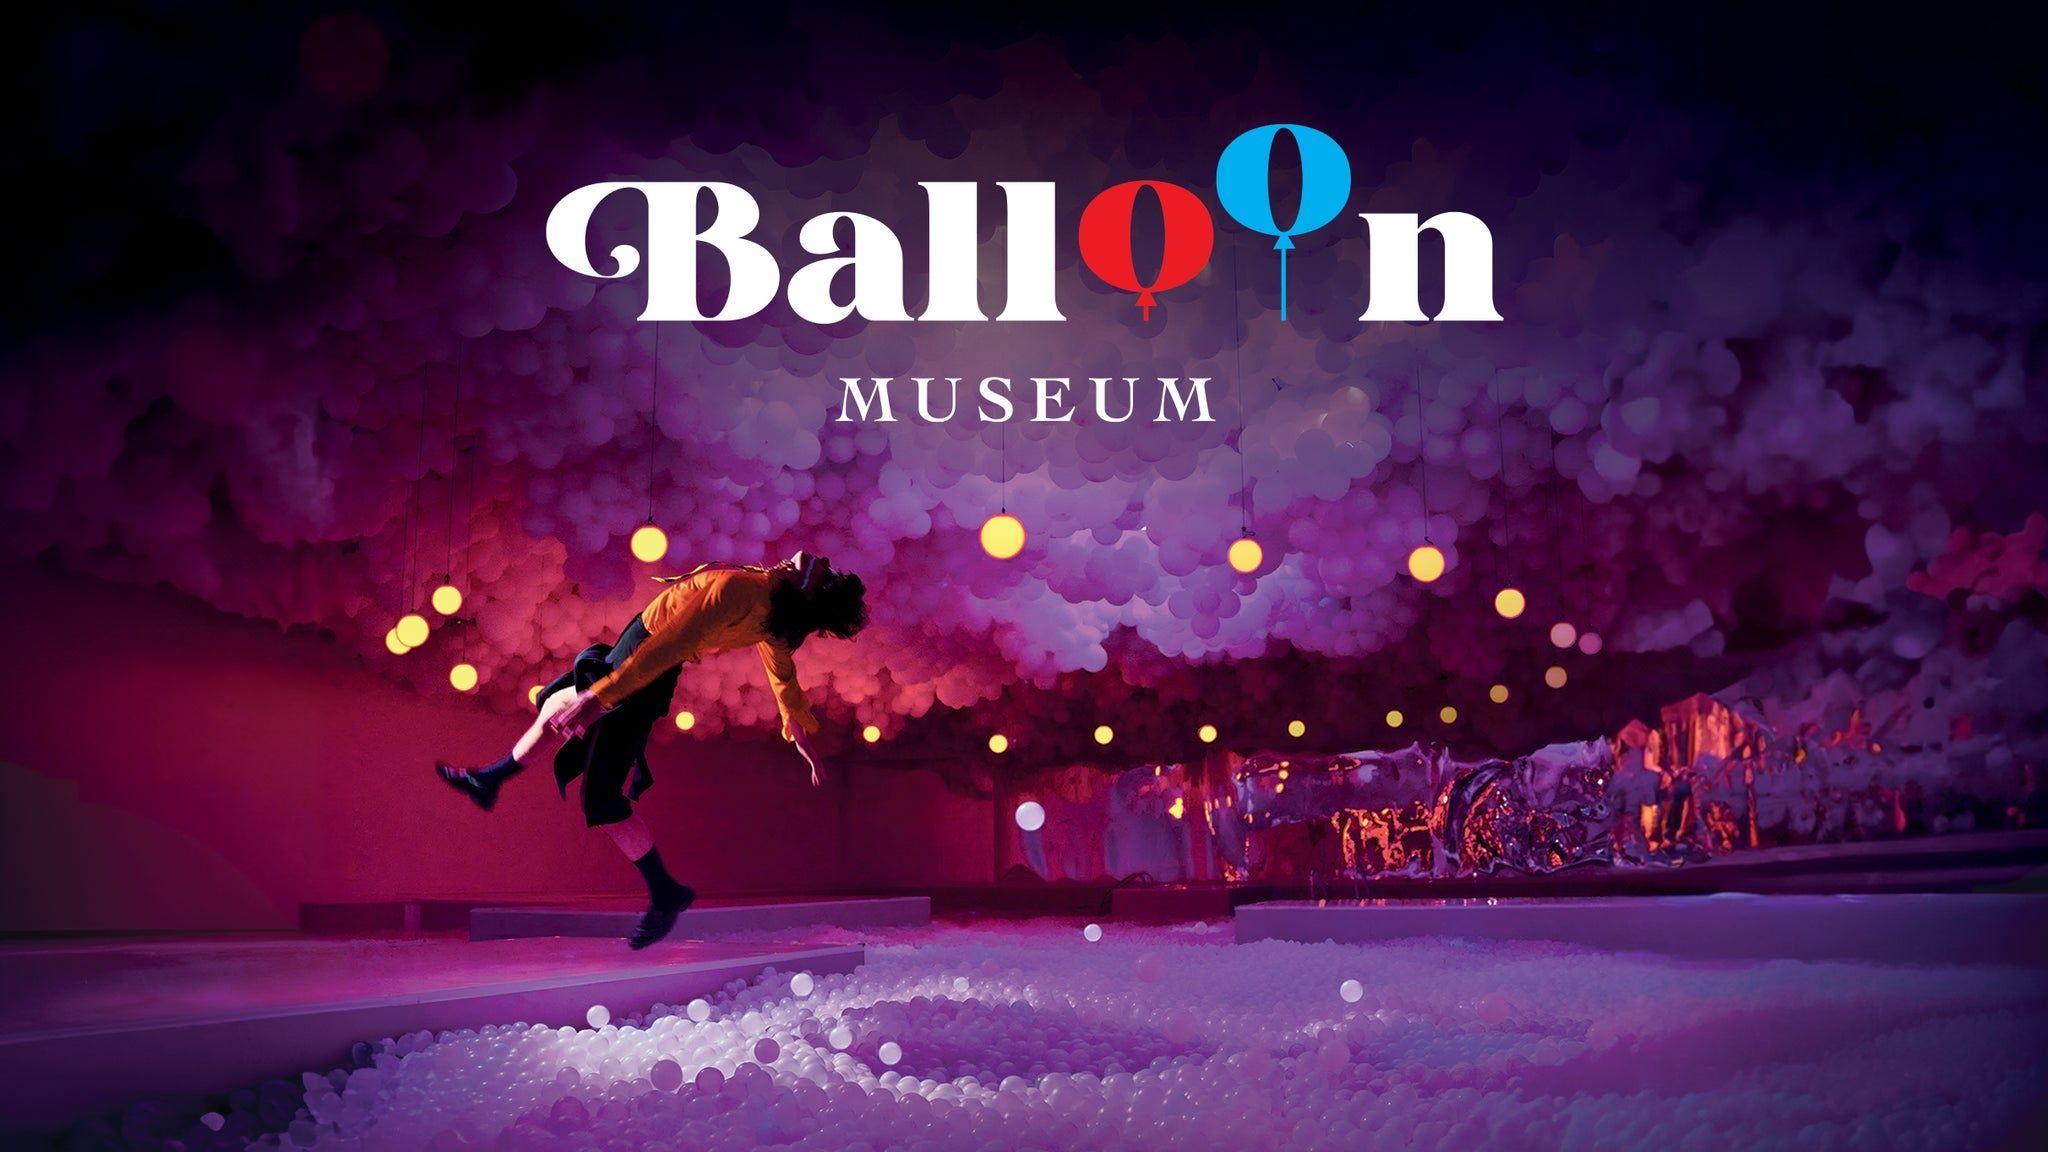 Balloon Museum - Let’s fly (December)